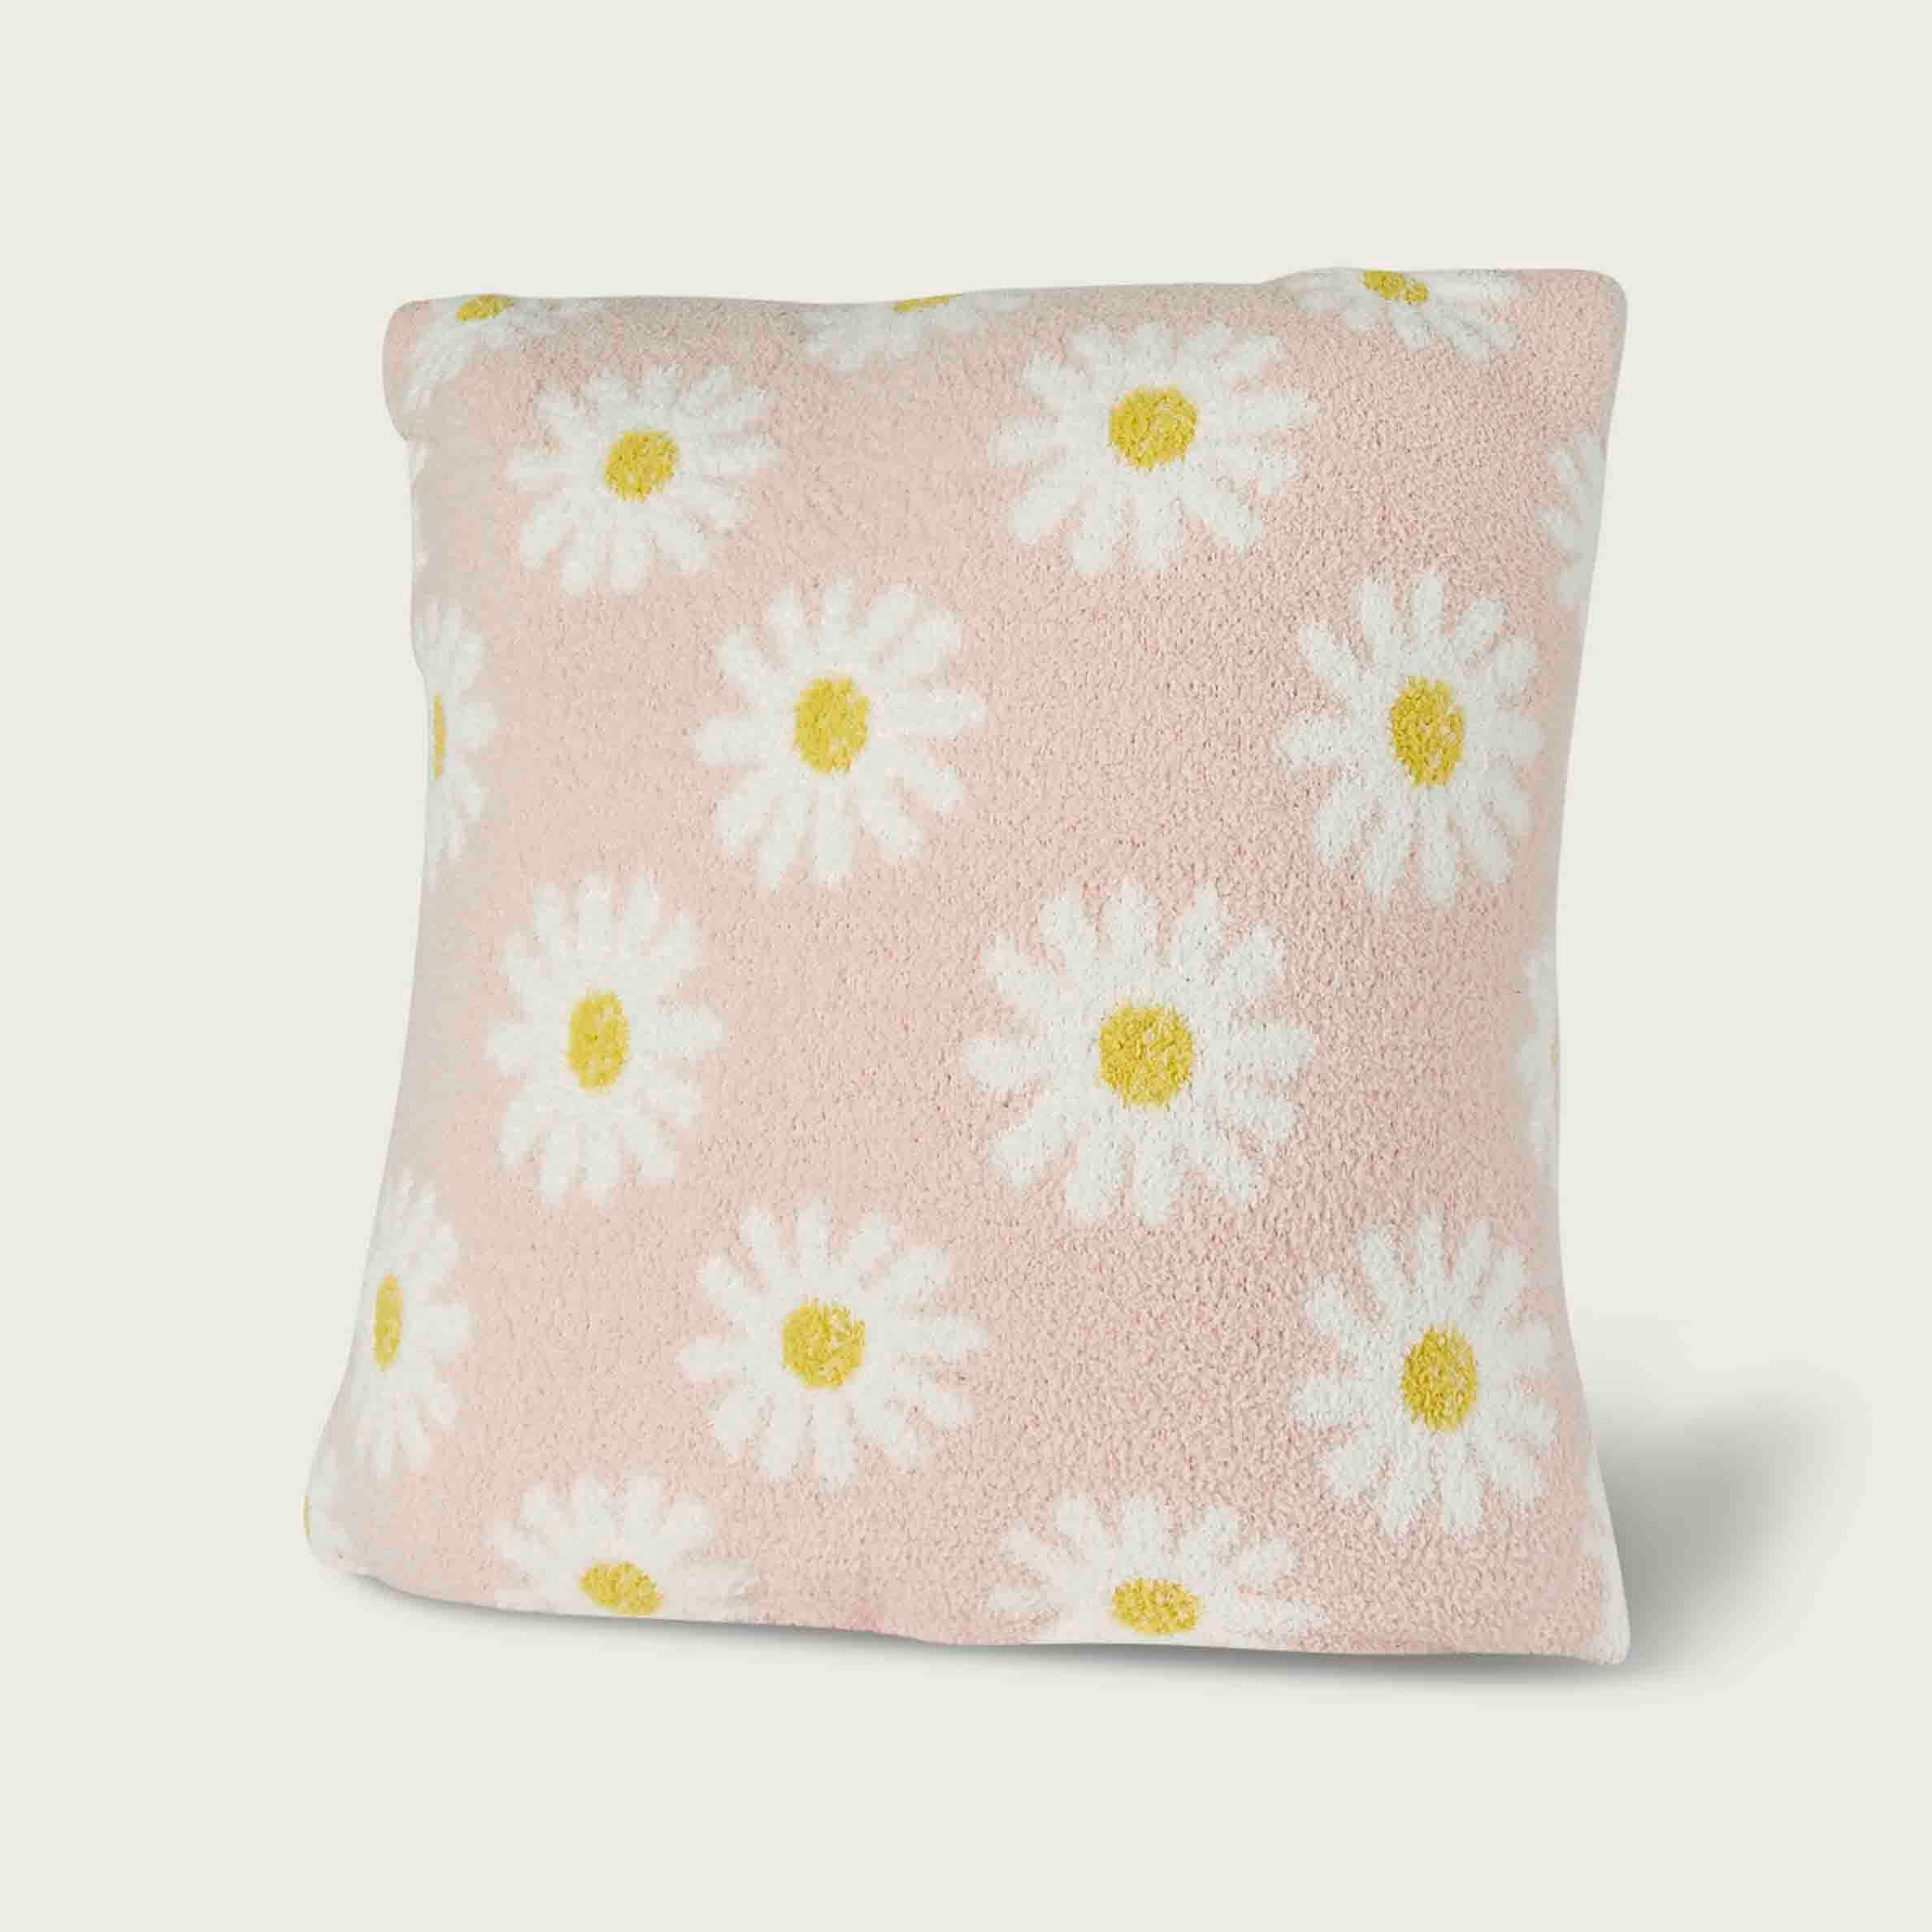 Chelsea & Theodore 20x20 Daisy Feather Yarn Pillow, Shell Pink